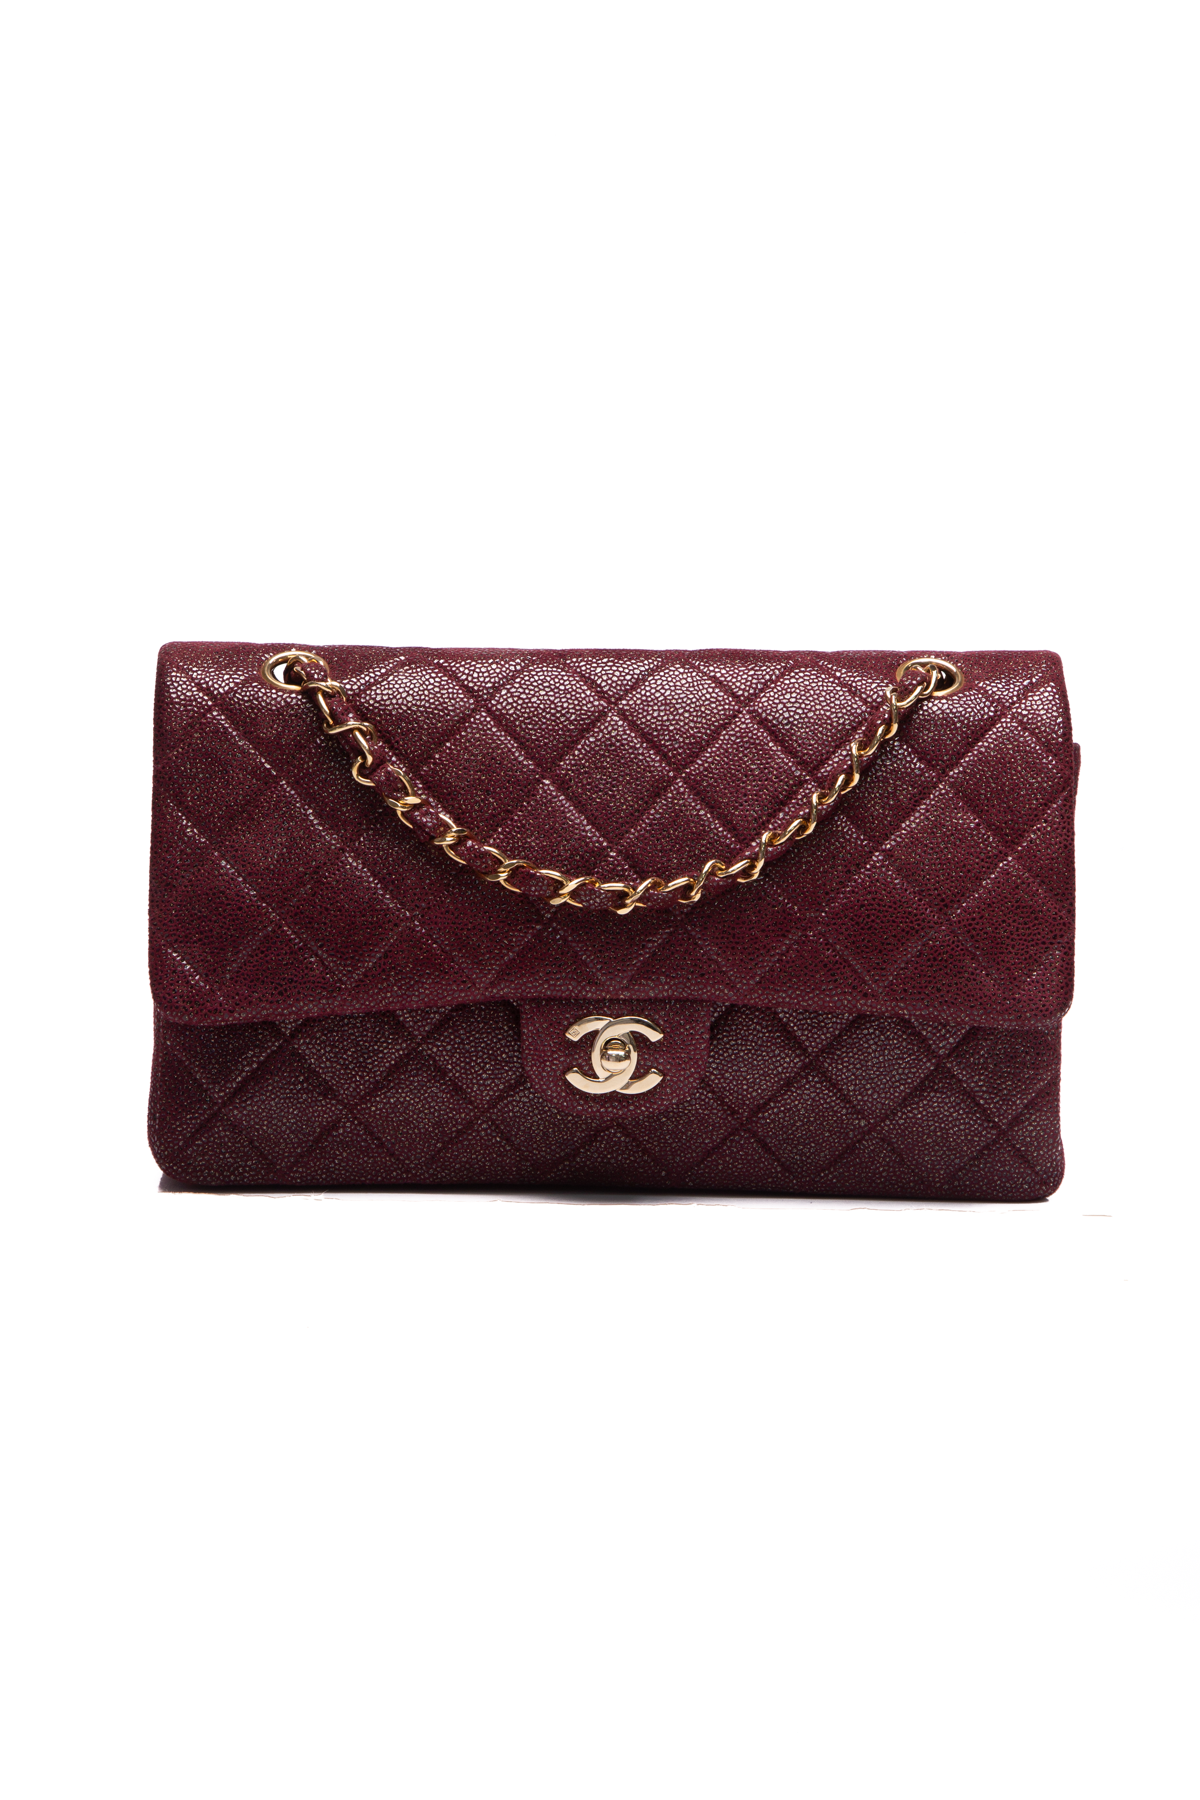 Chanel Bag Medium Double Flap Brown Distressed Leather Antique